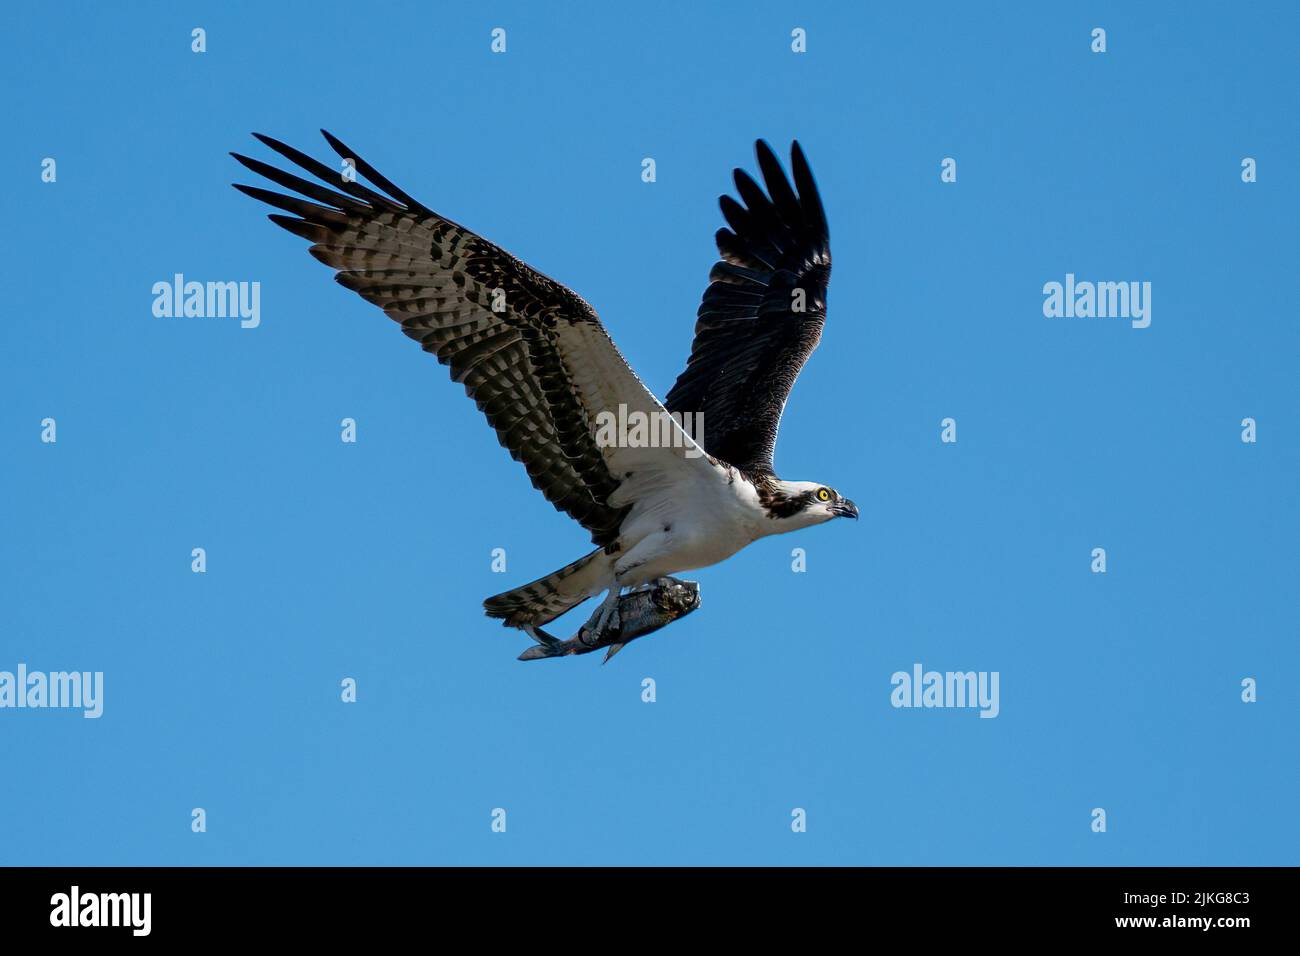 An osprey flying in the air with a hunted fish Stock Photo